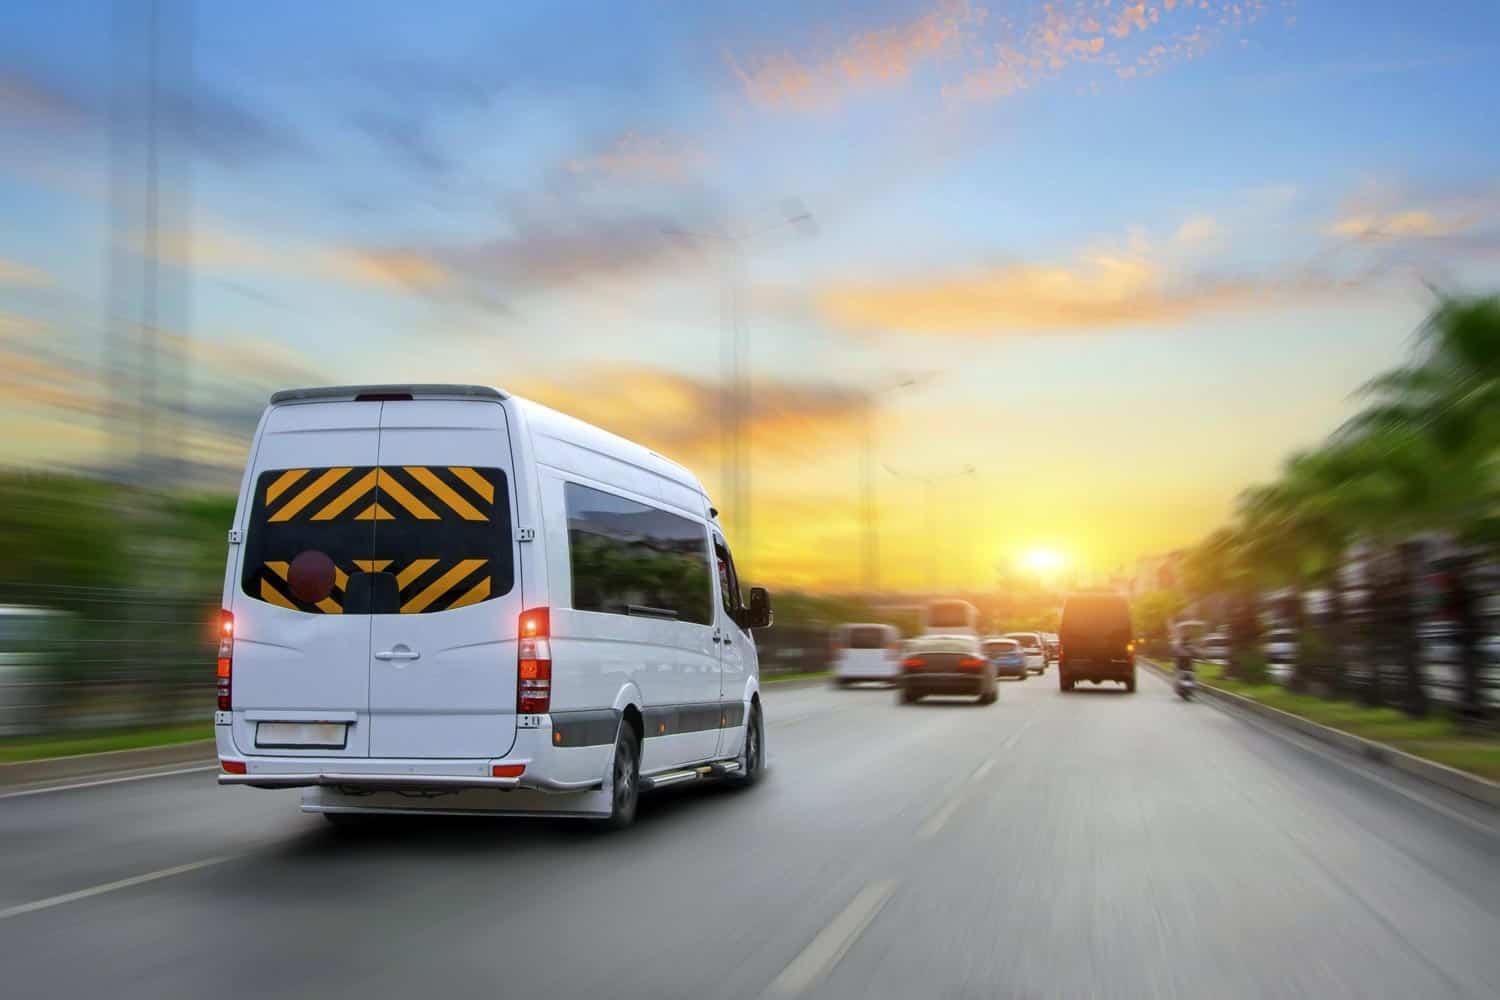 party limo bus insurance quote